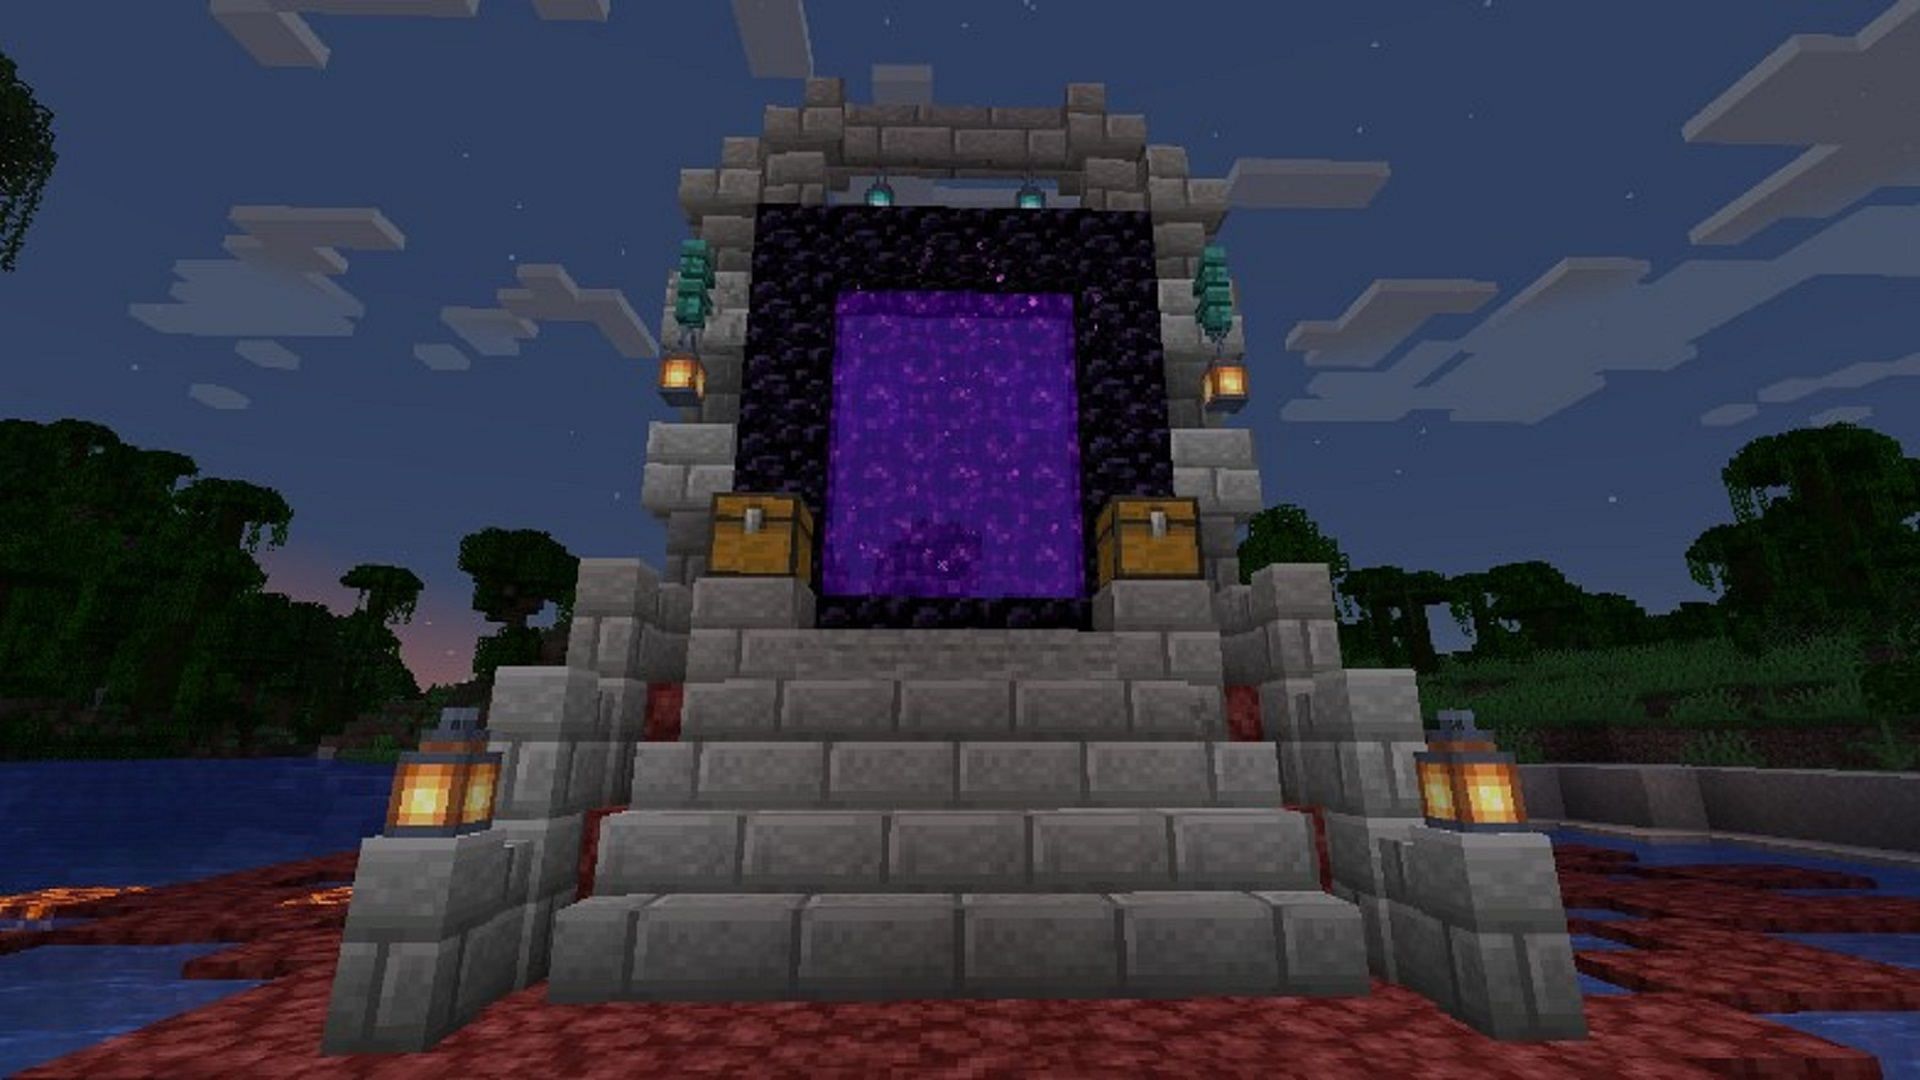 Players can use the Nether to cross vast distances in the Overworld (Image via Diamondlobby.com)